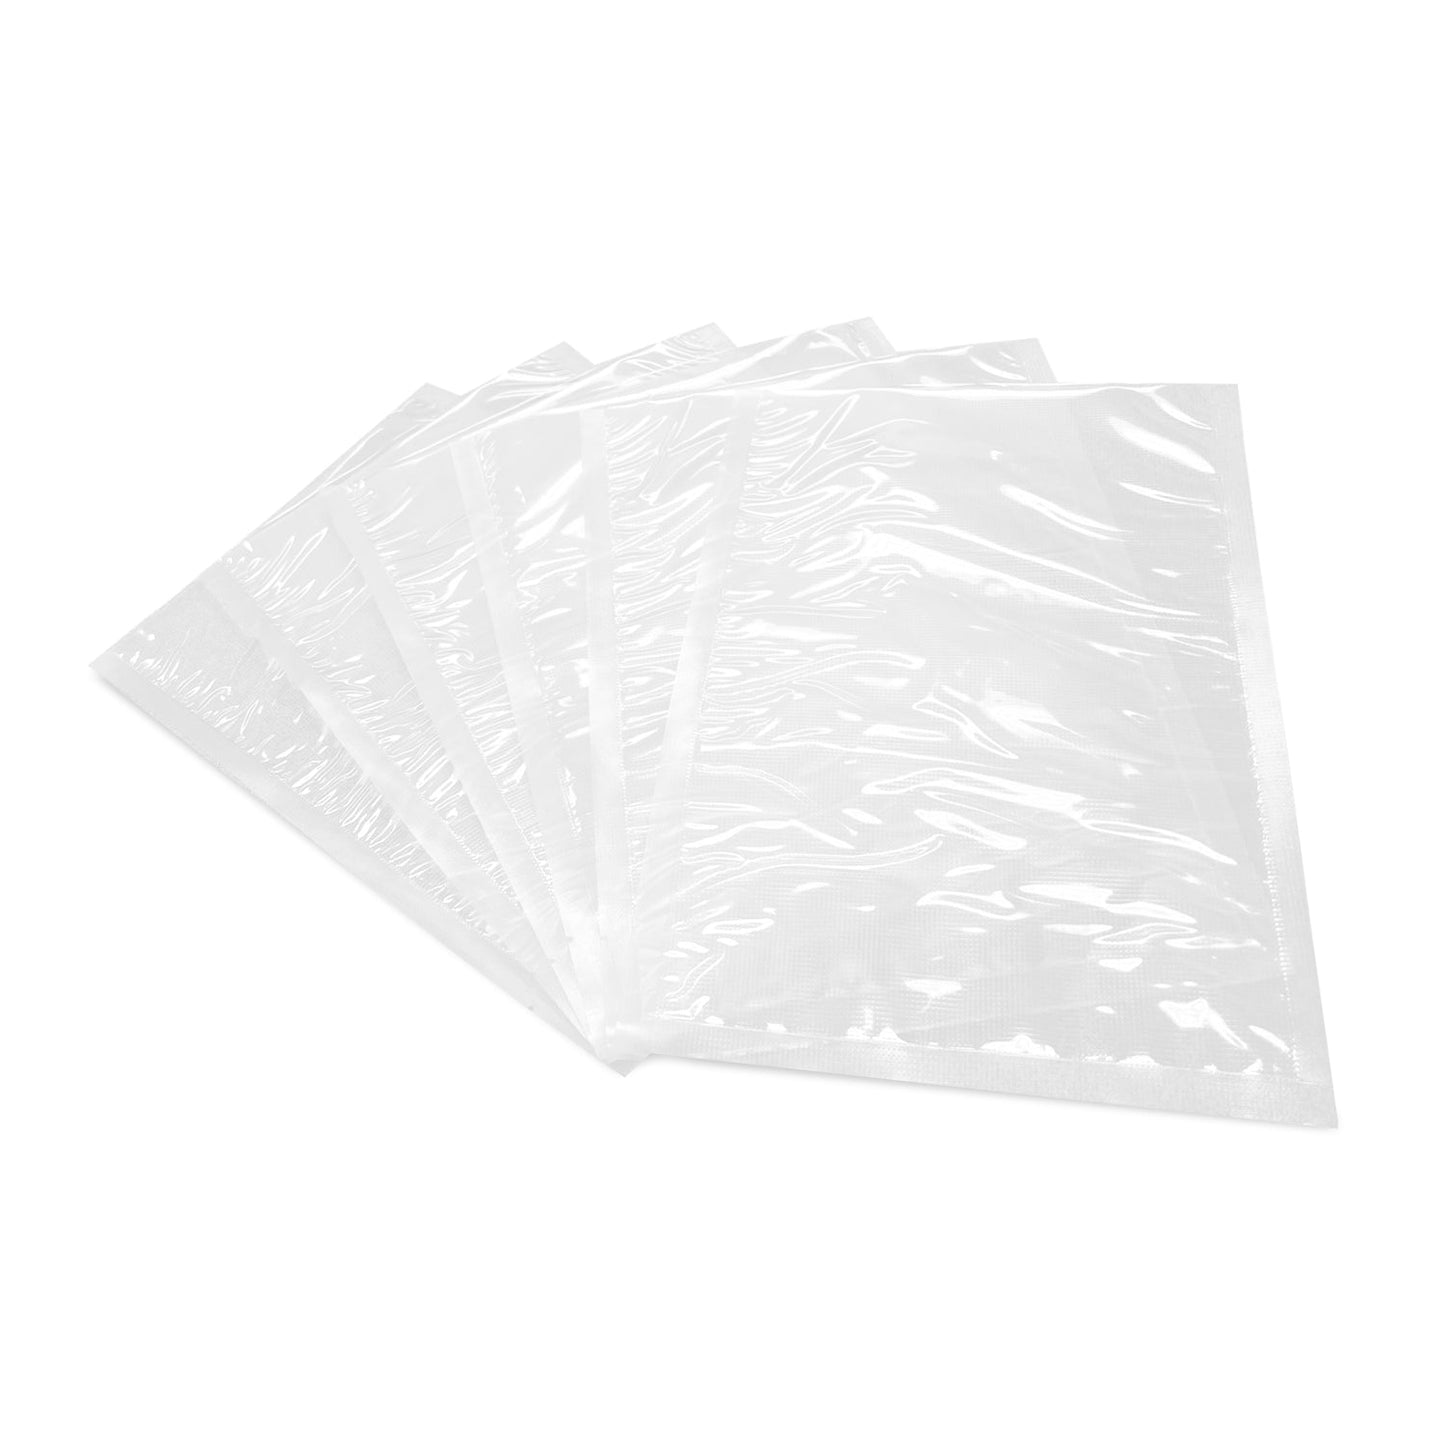 100pcs 8x12 inches Clear Vacuum Bags; $0.35/pc